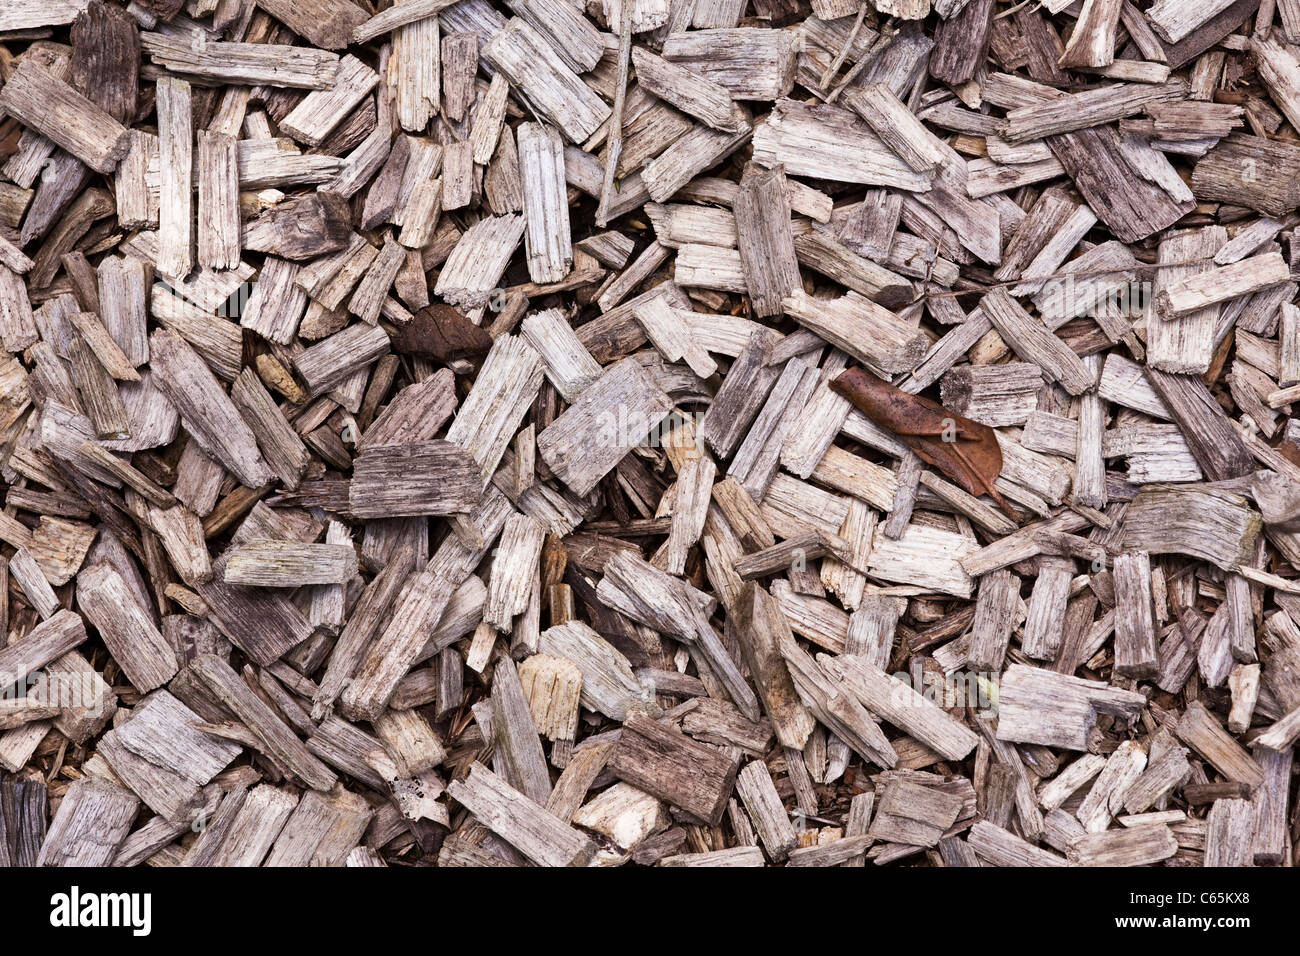 Bark mulch on a planted area Stock Photo